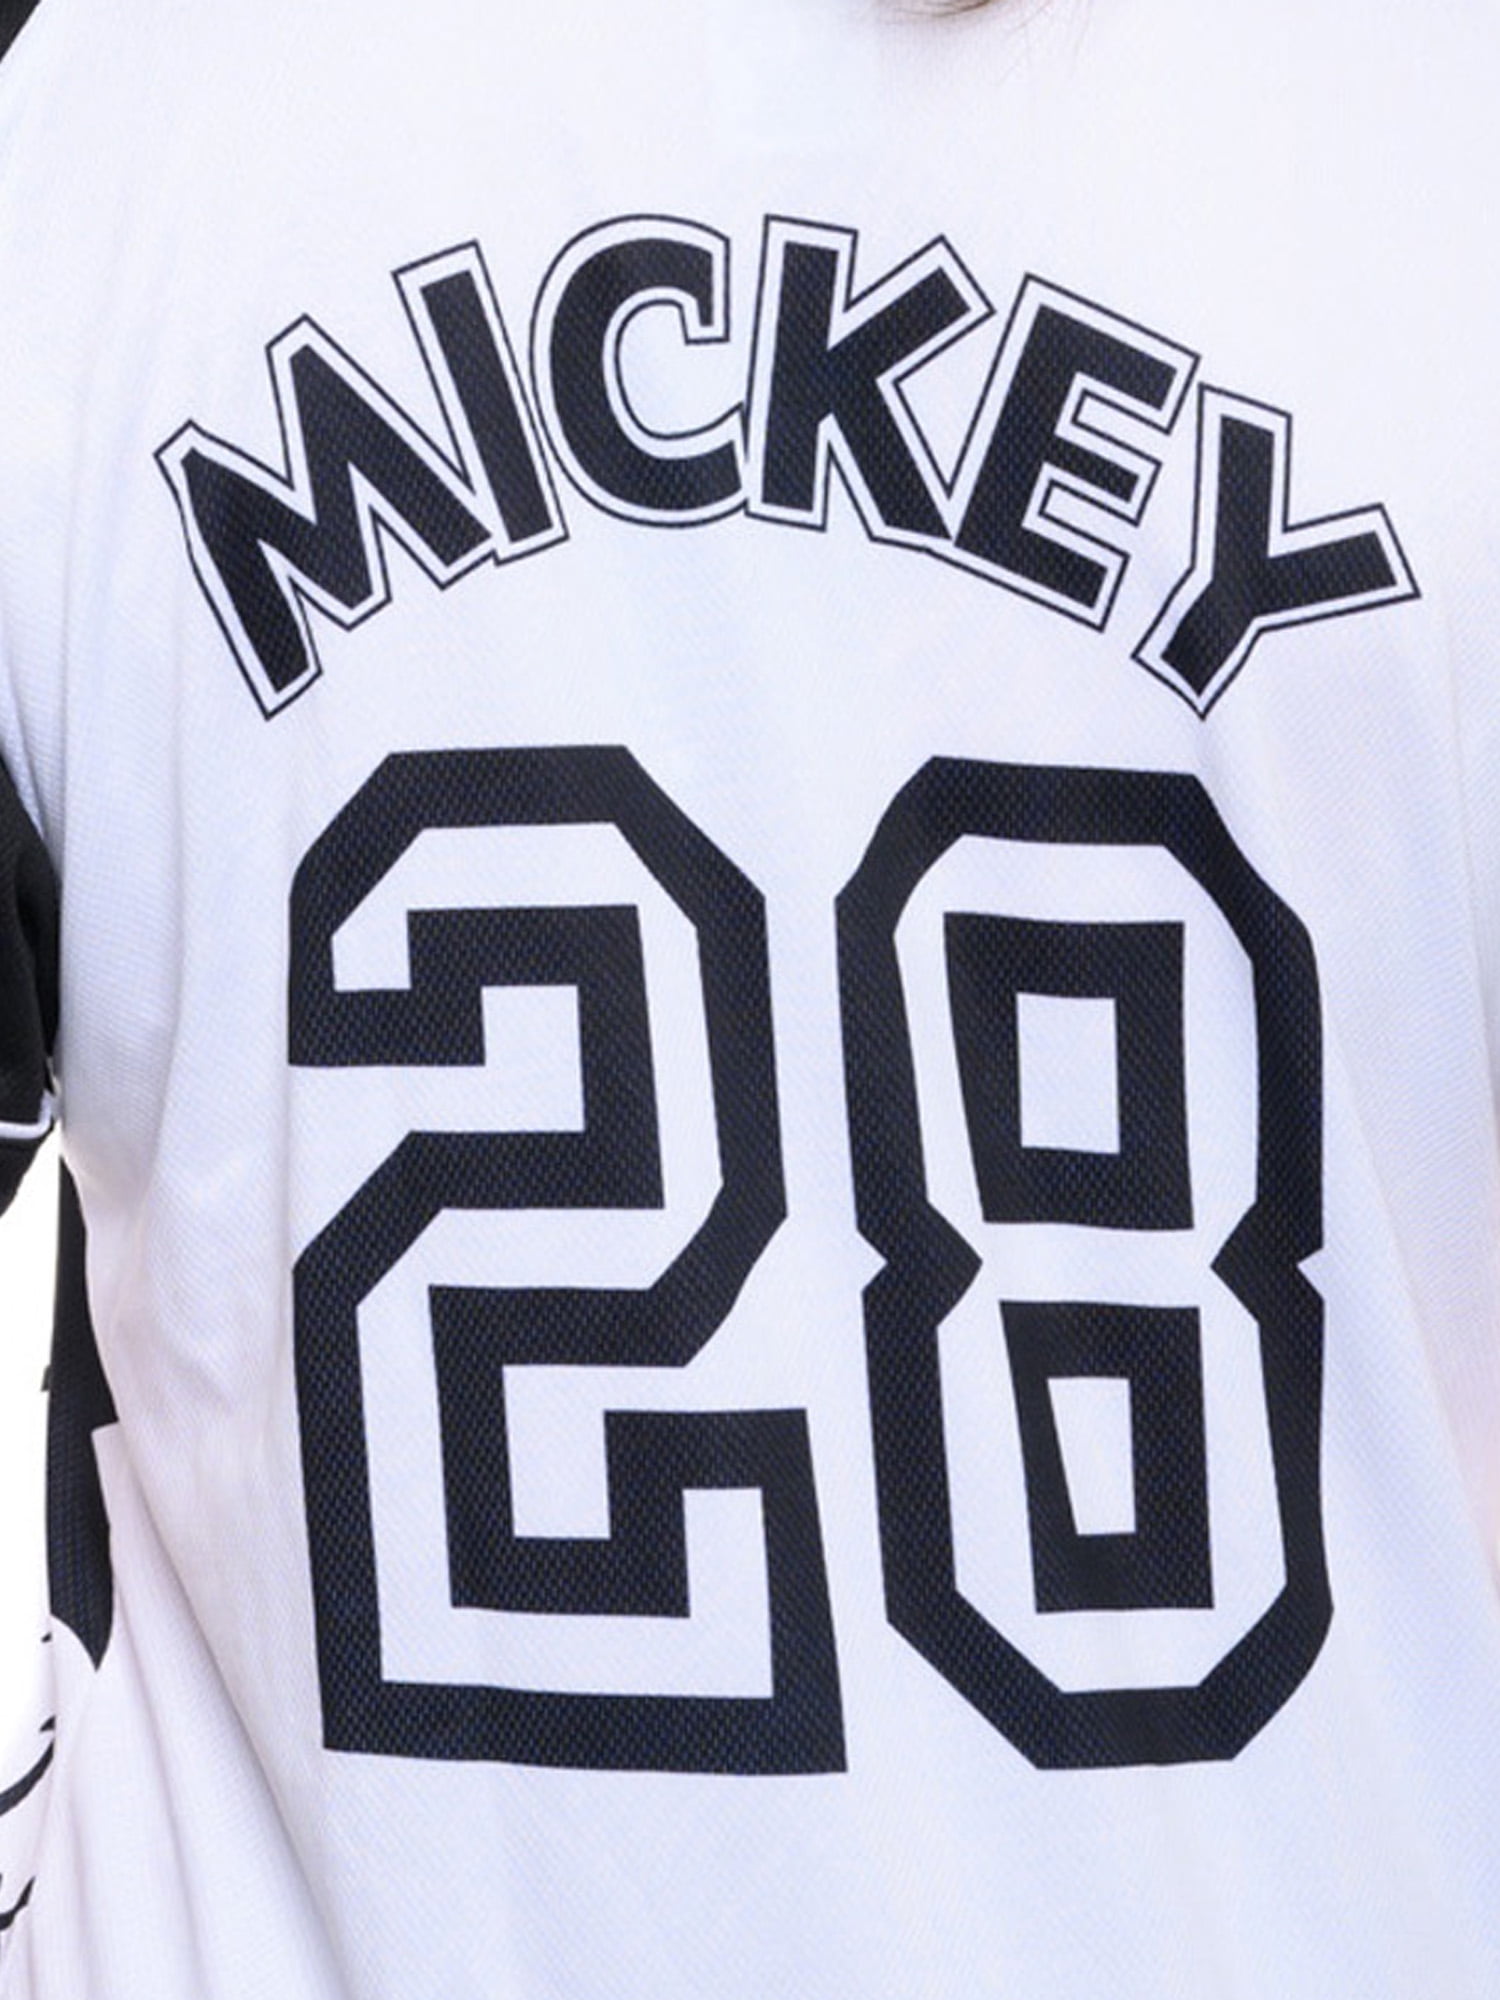 Mickey Mouse White Red Disney Baseball Jersey Shirt designed & sold by  Printerval